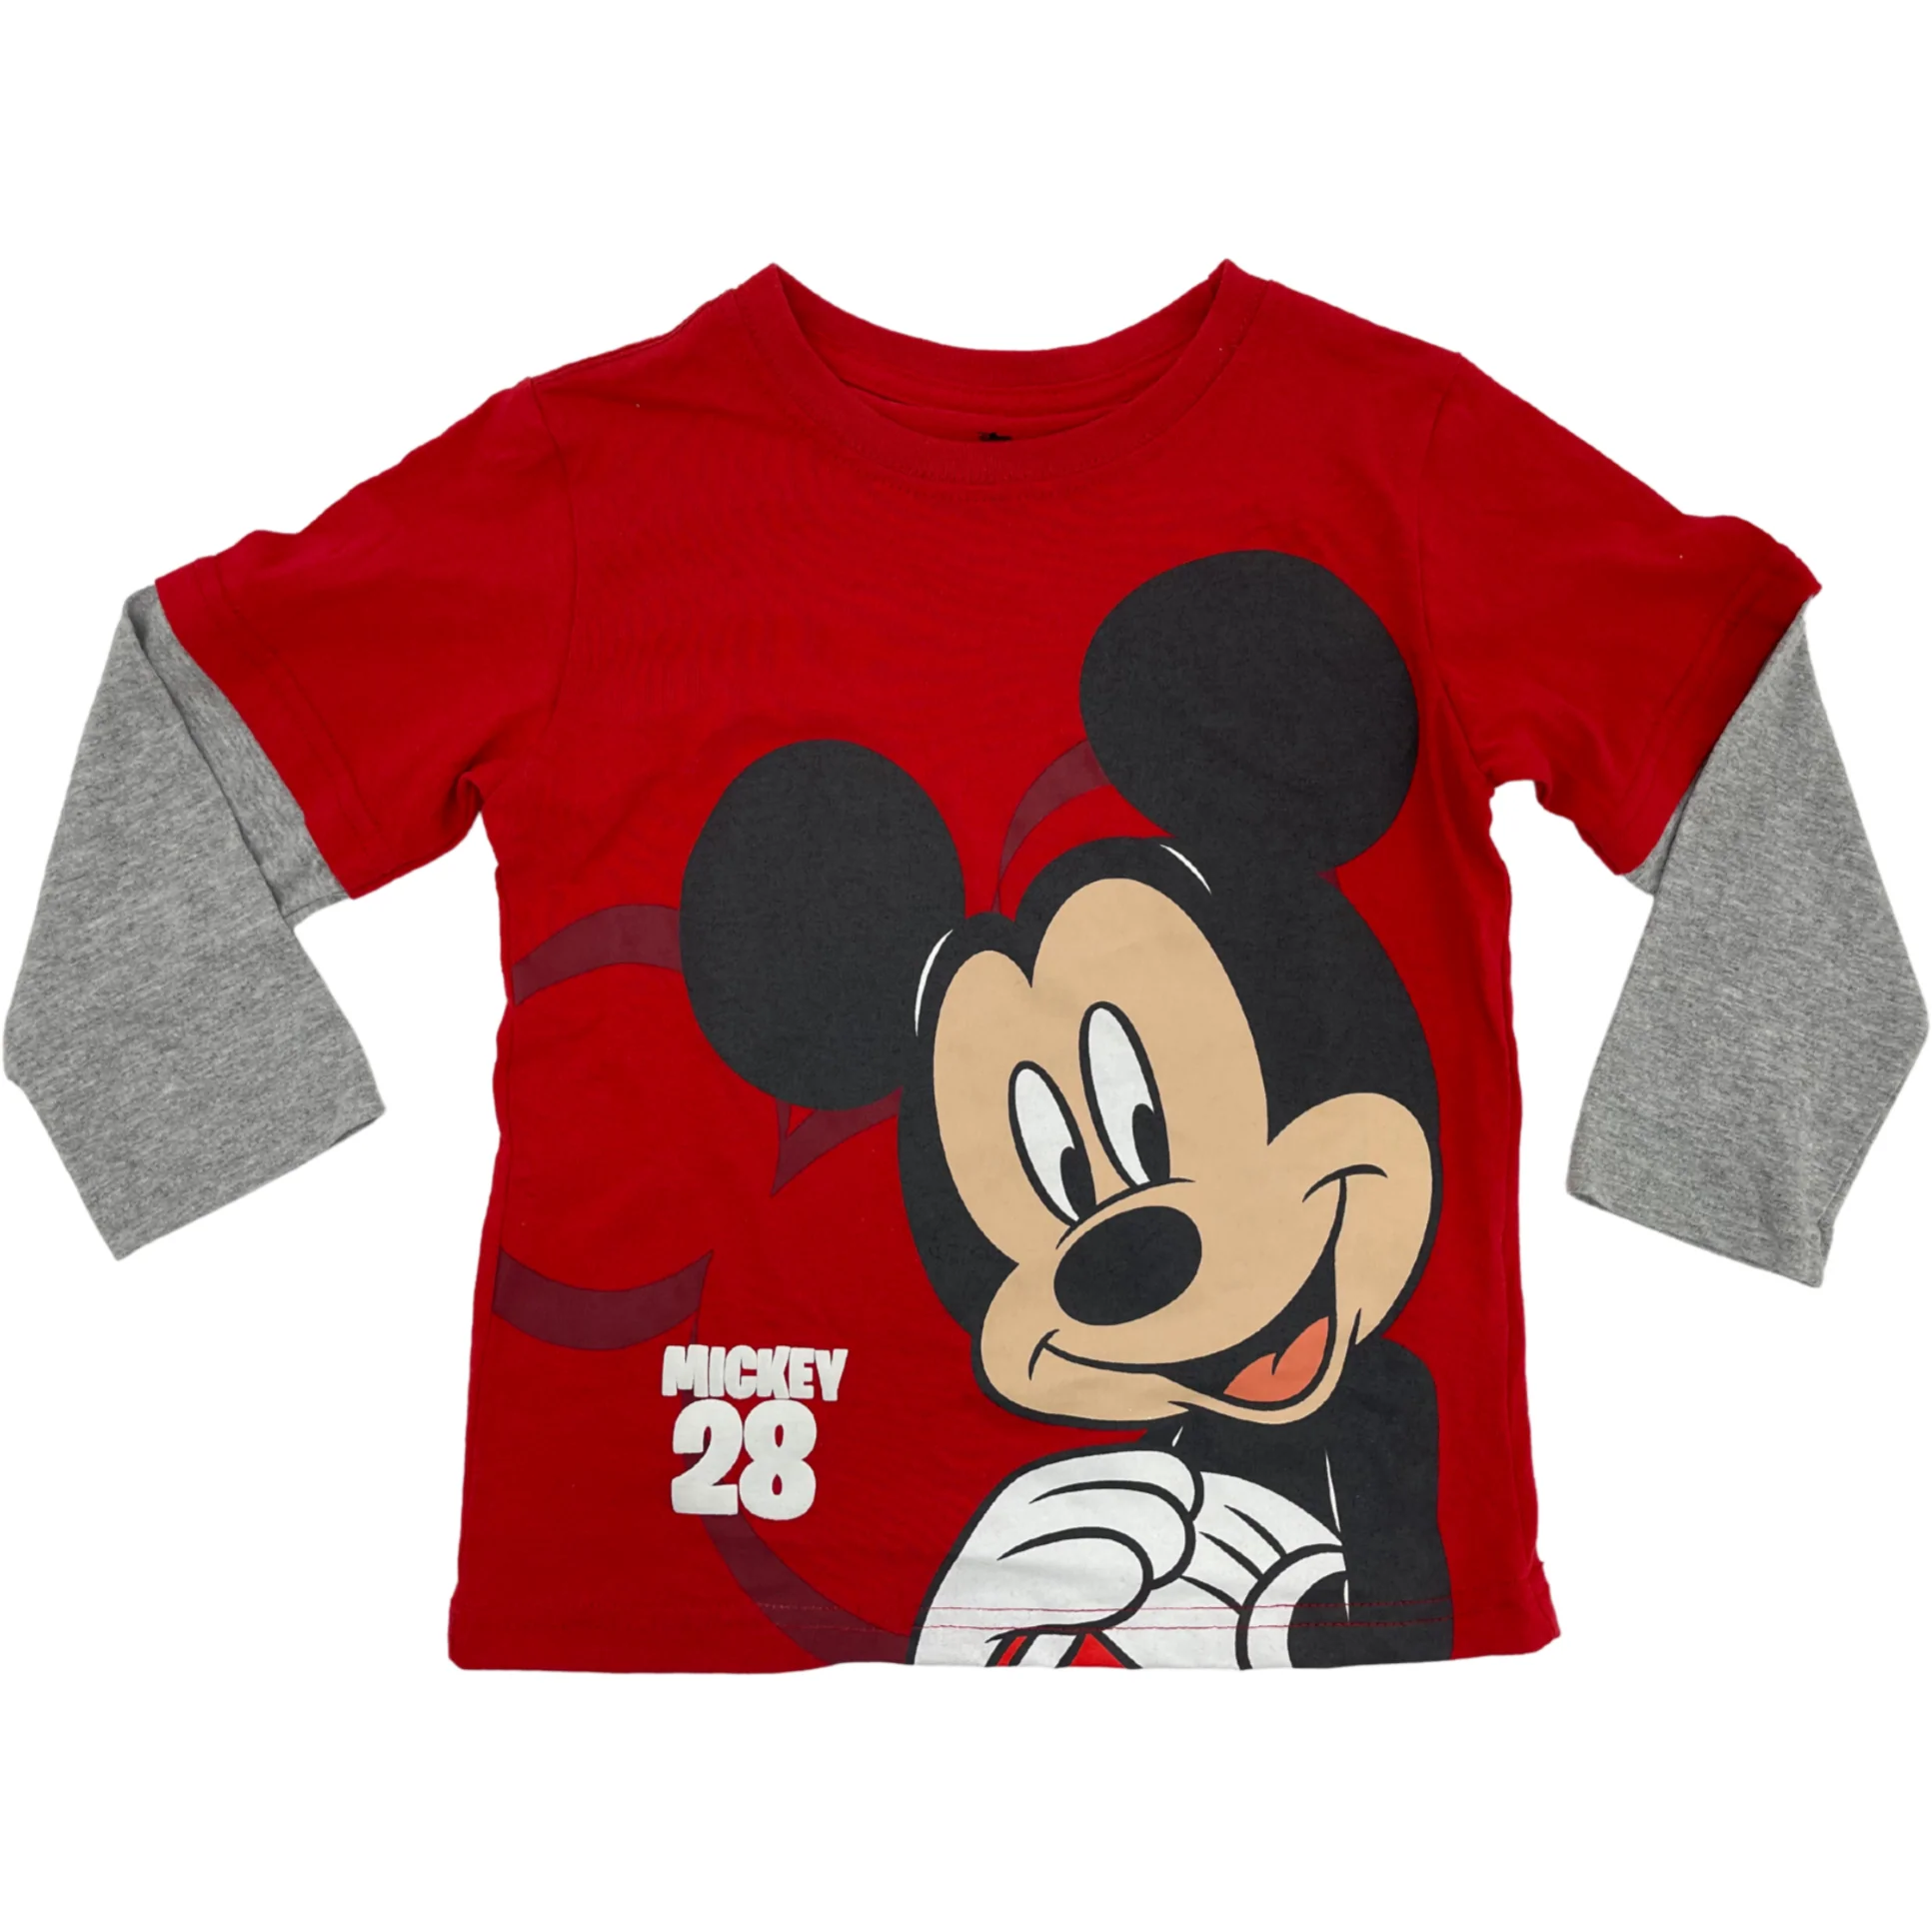 Disney Junior Boy's Long Sleeve Shirt / Mickey Mouse / Red & Grey / Size 4T